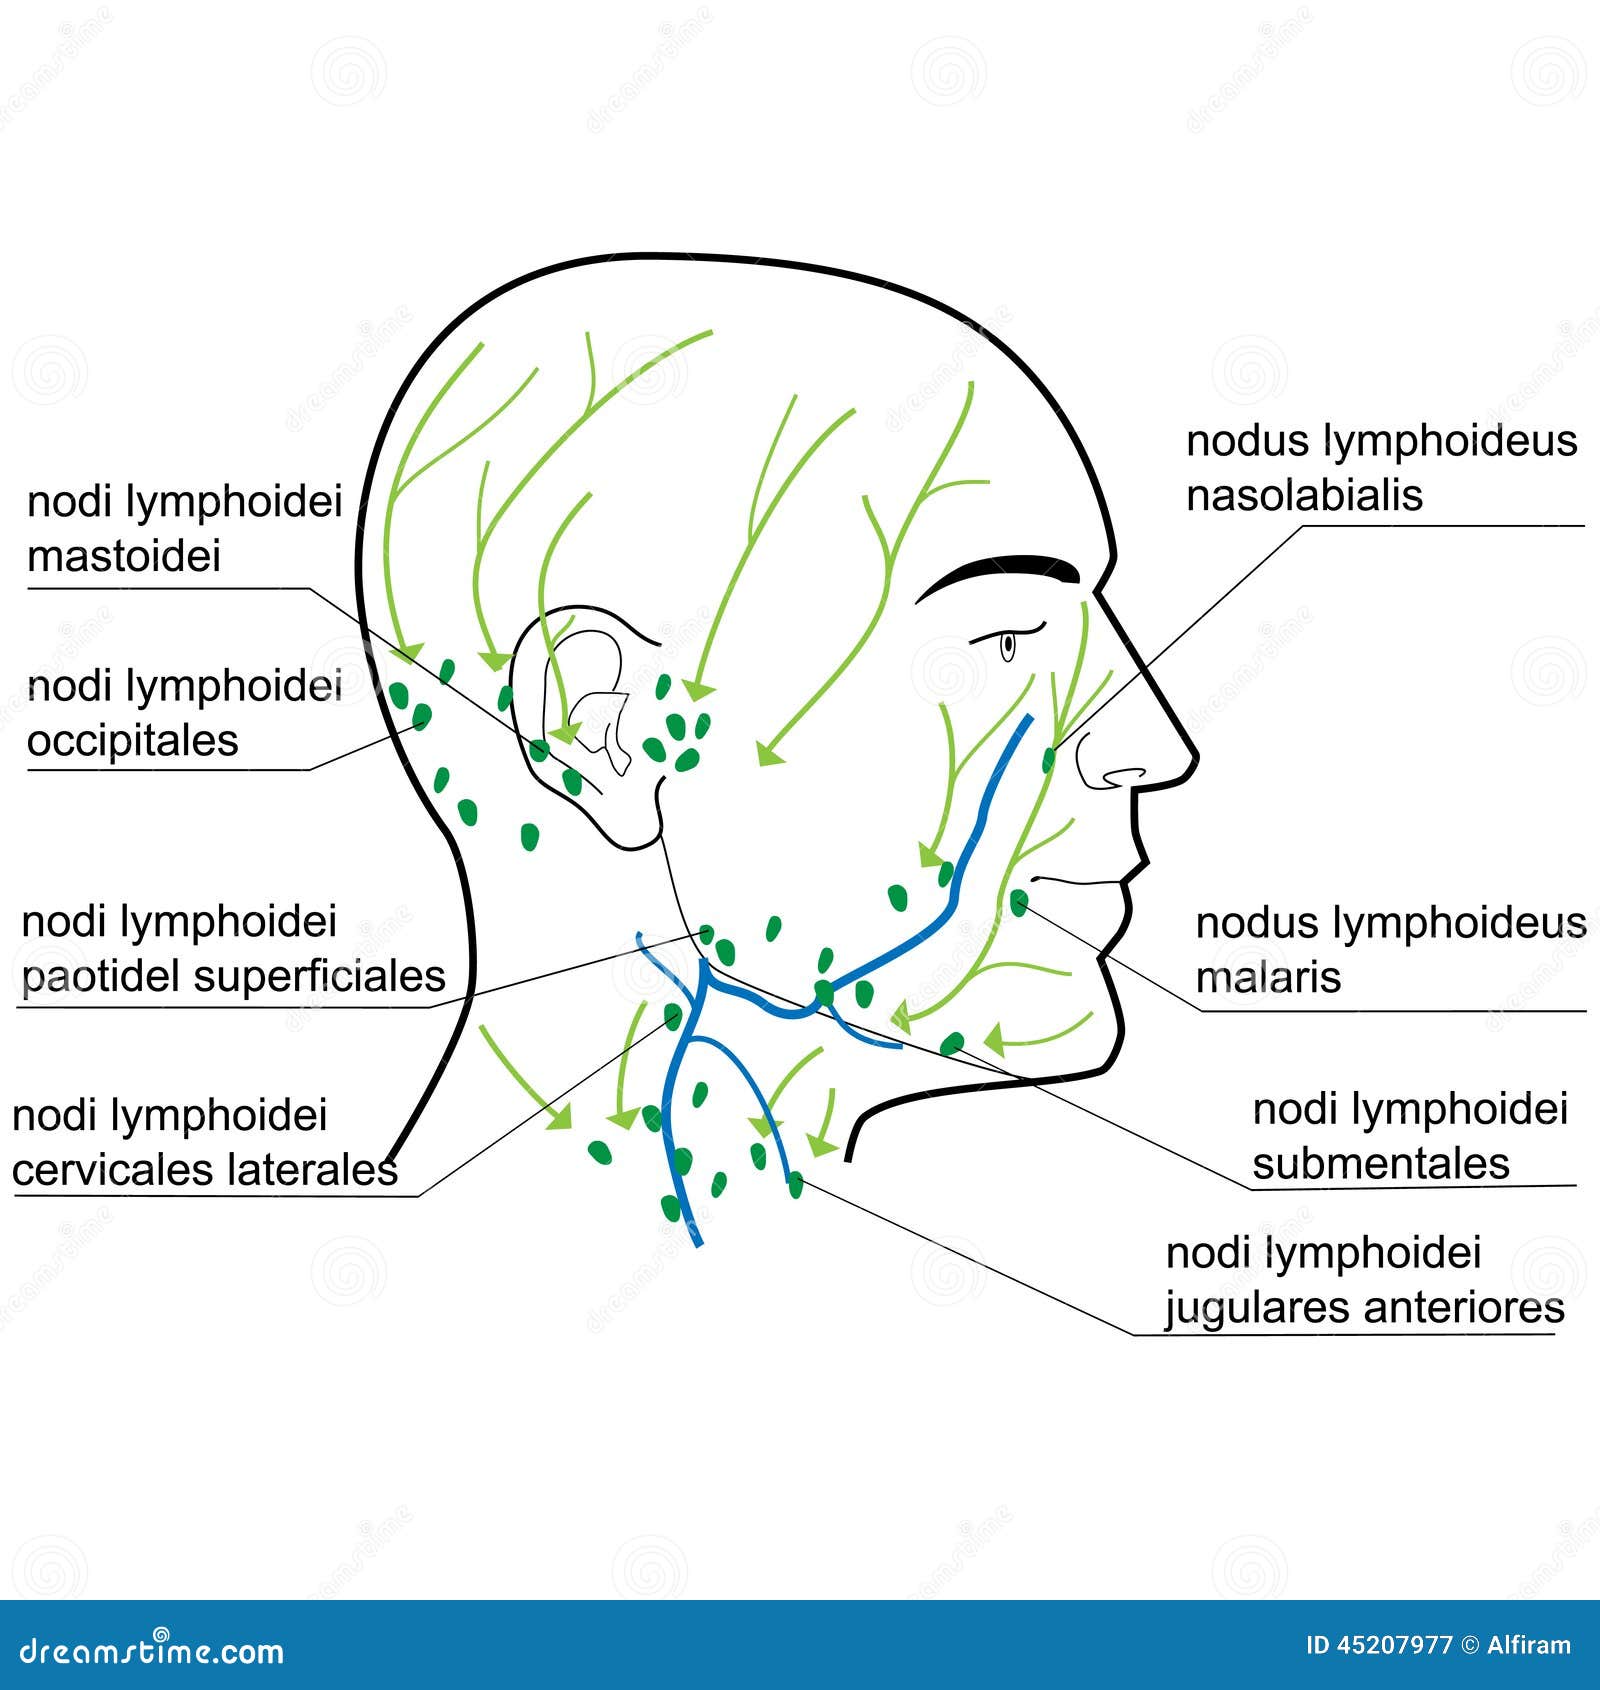 lymph nodes of the head and neck.